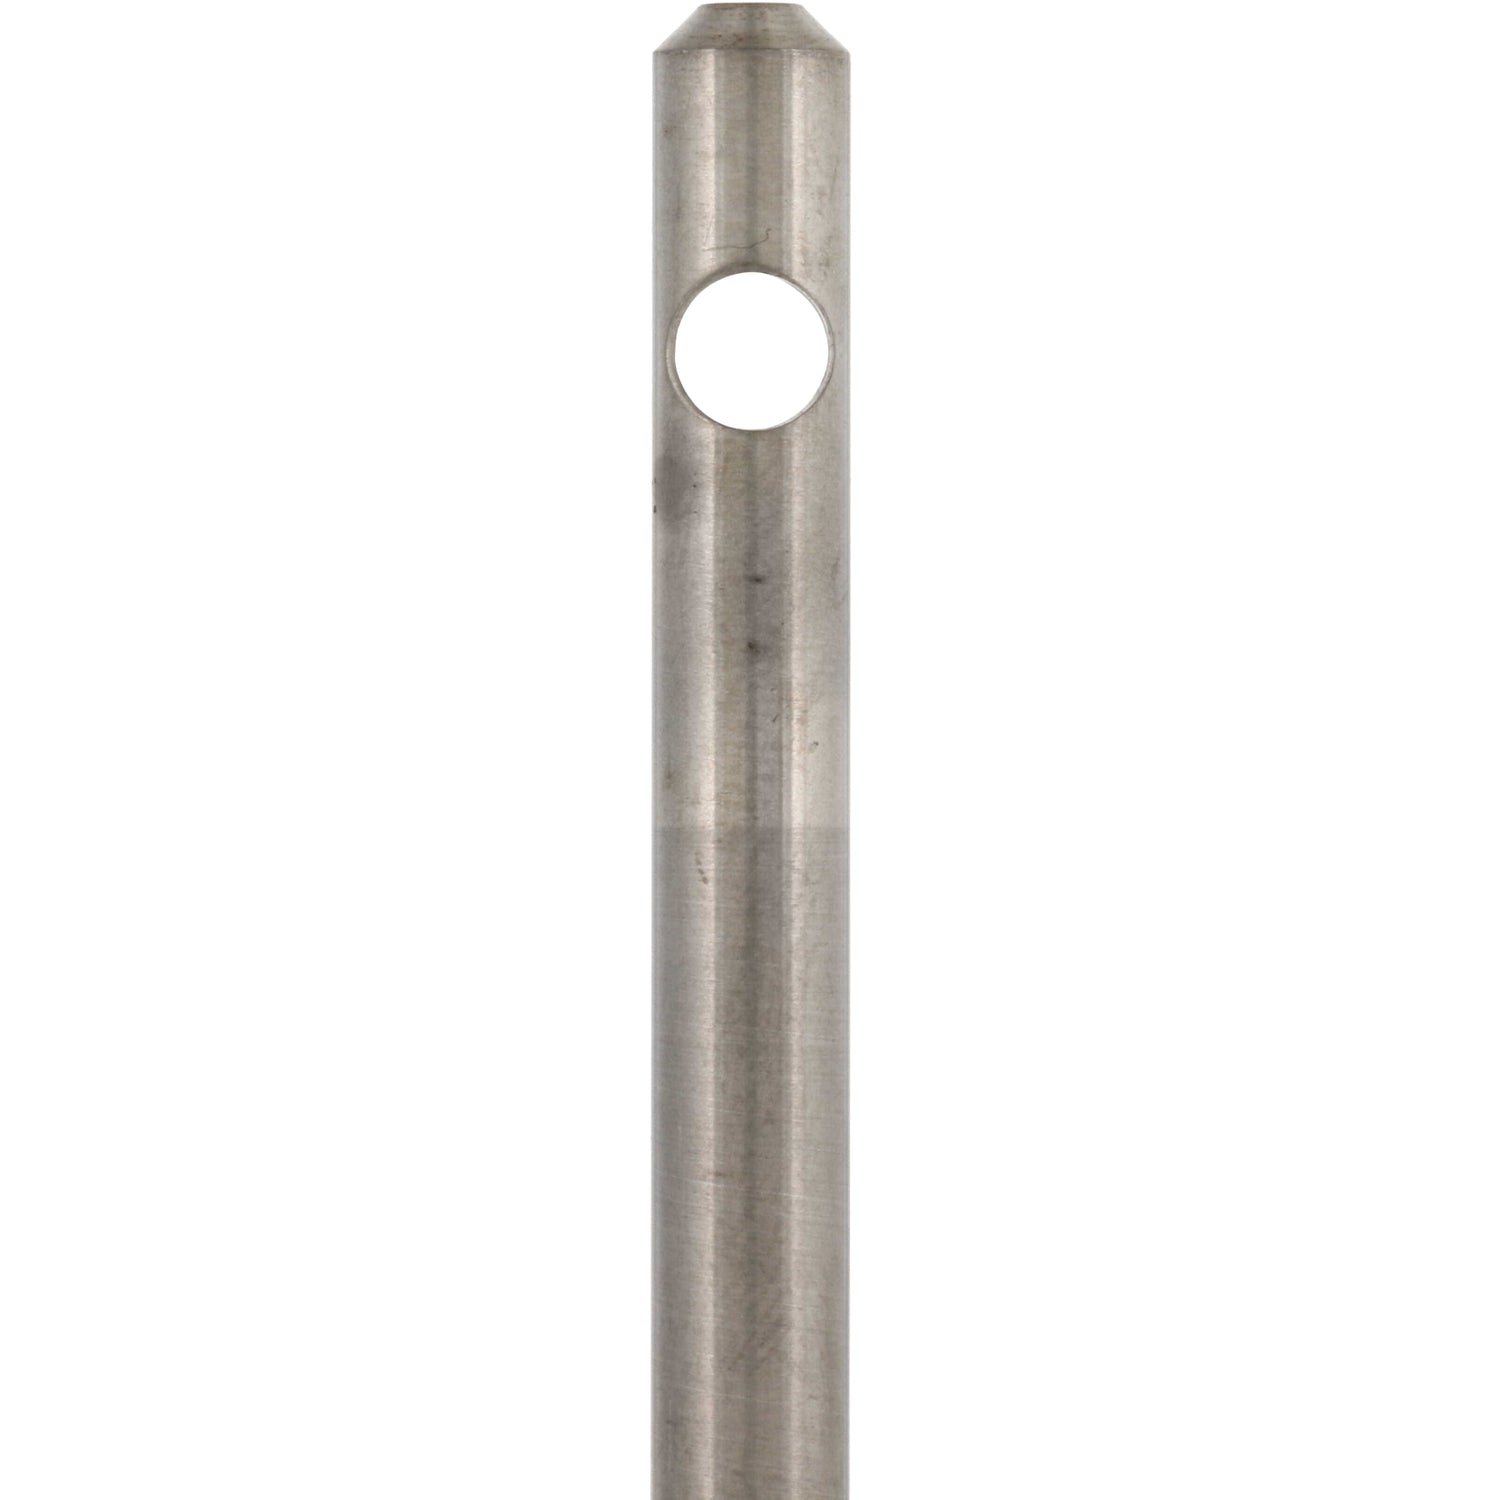 Stainless steel rod with through hole on white background. 